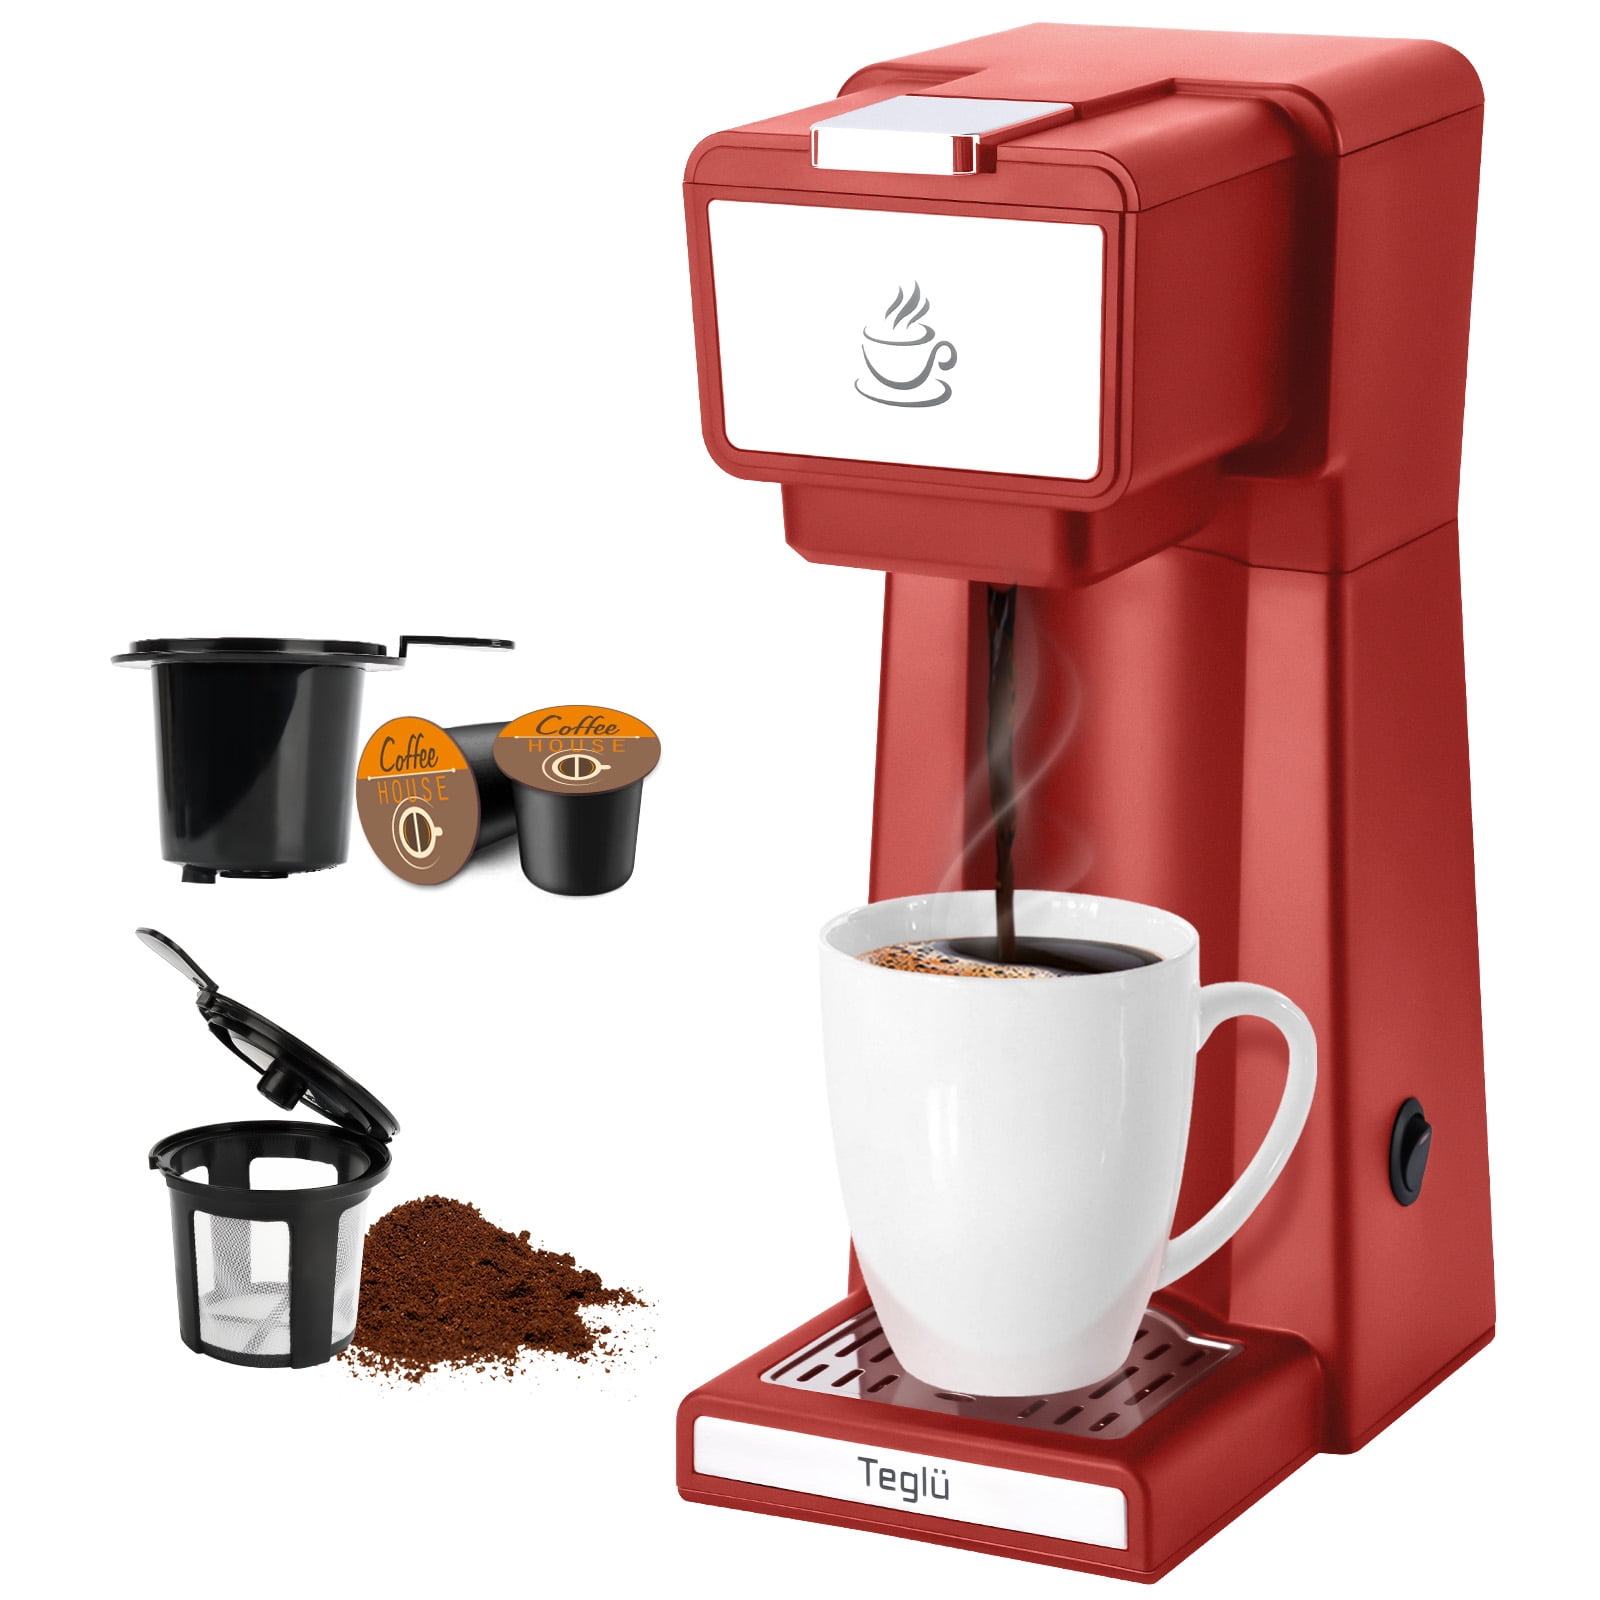 Gymax 2 in 1 Portable Coffee Maker Coffee Machine for Ground